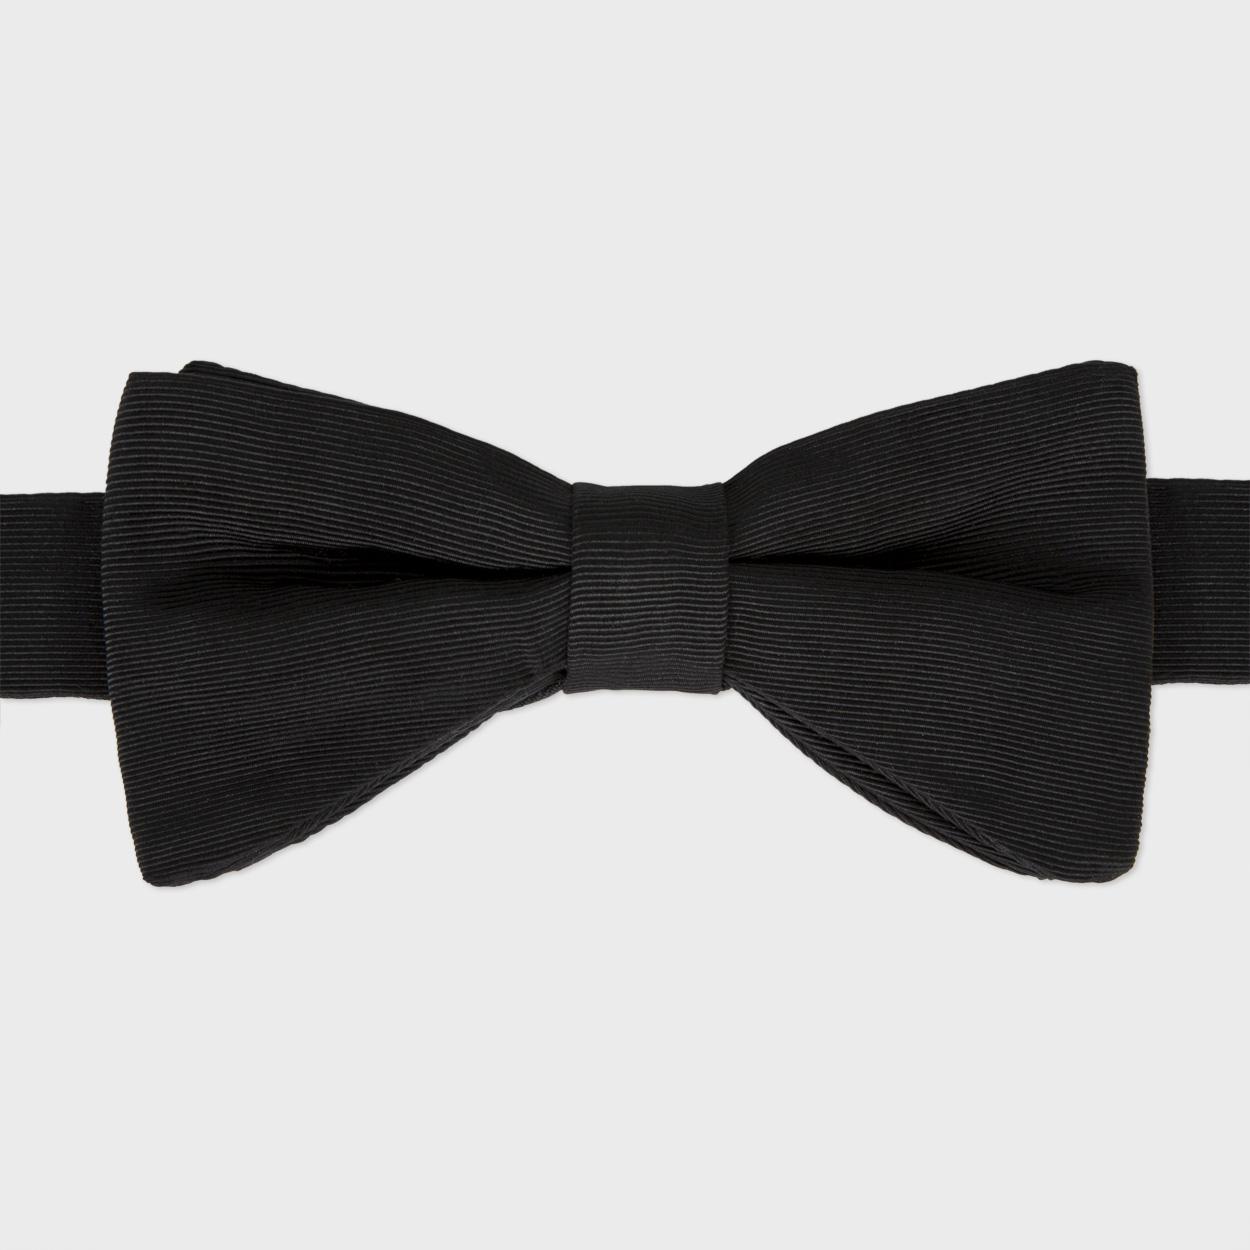 Free Black Bow Tie Png, Download Free Black Bow Tie Png png images ...